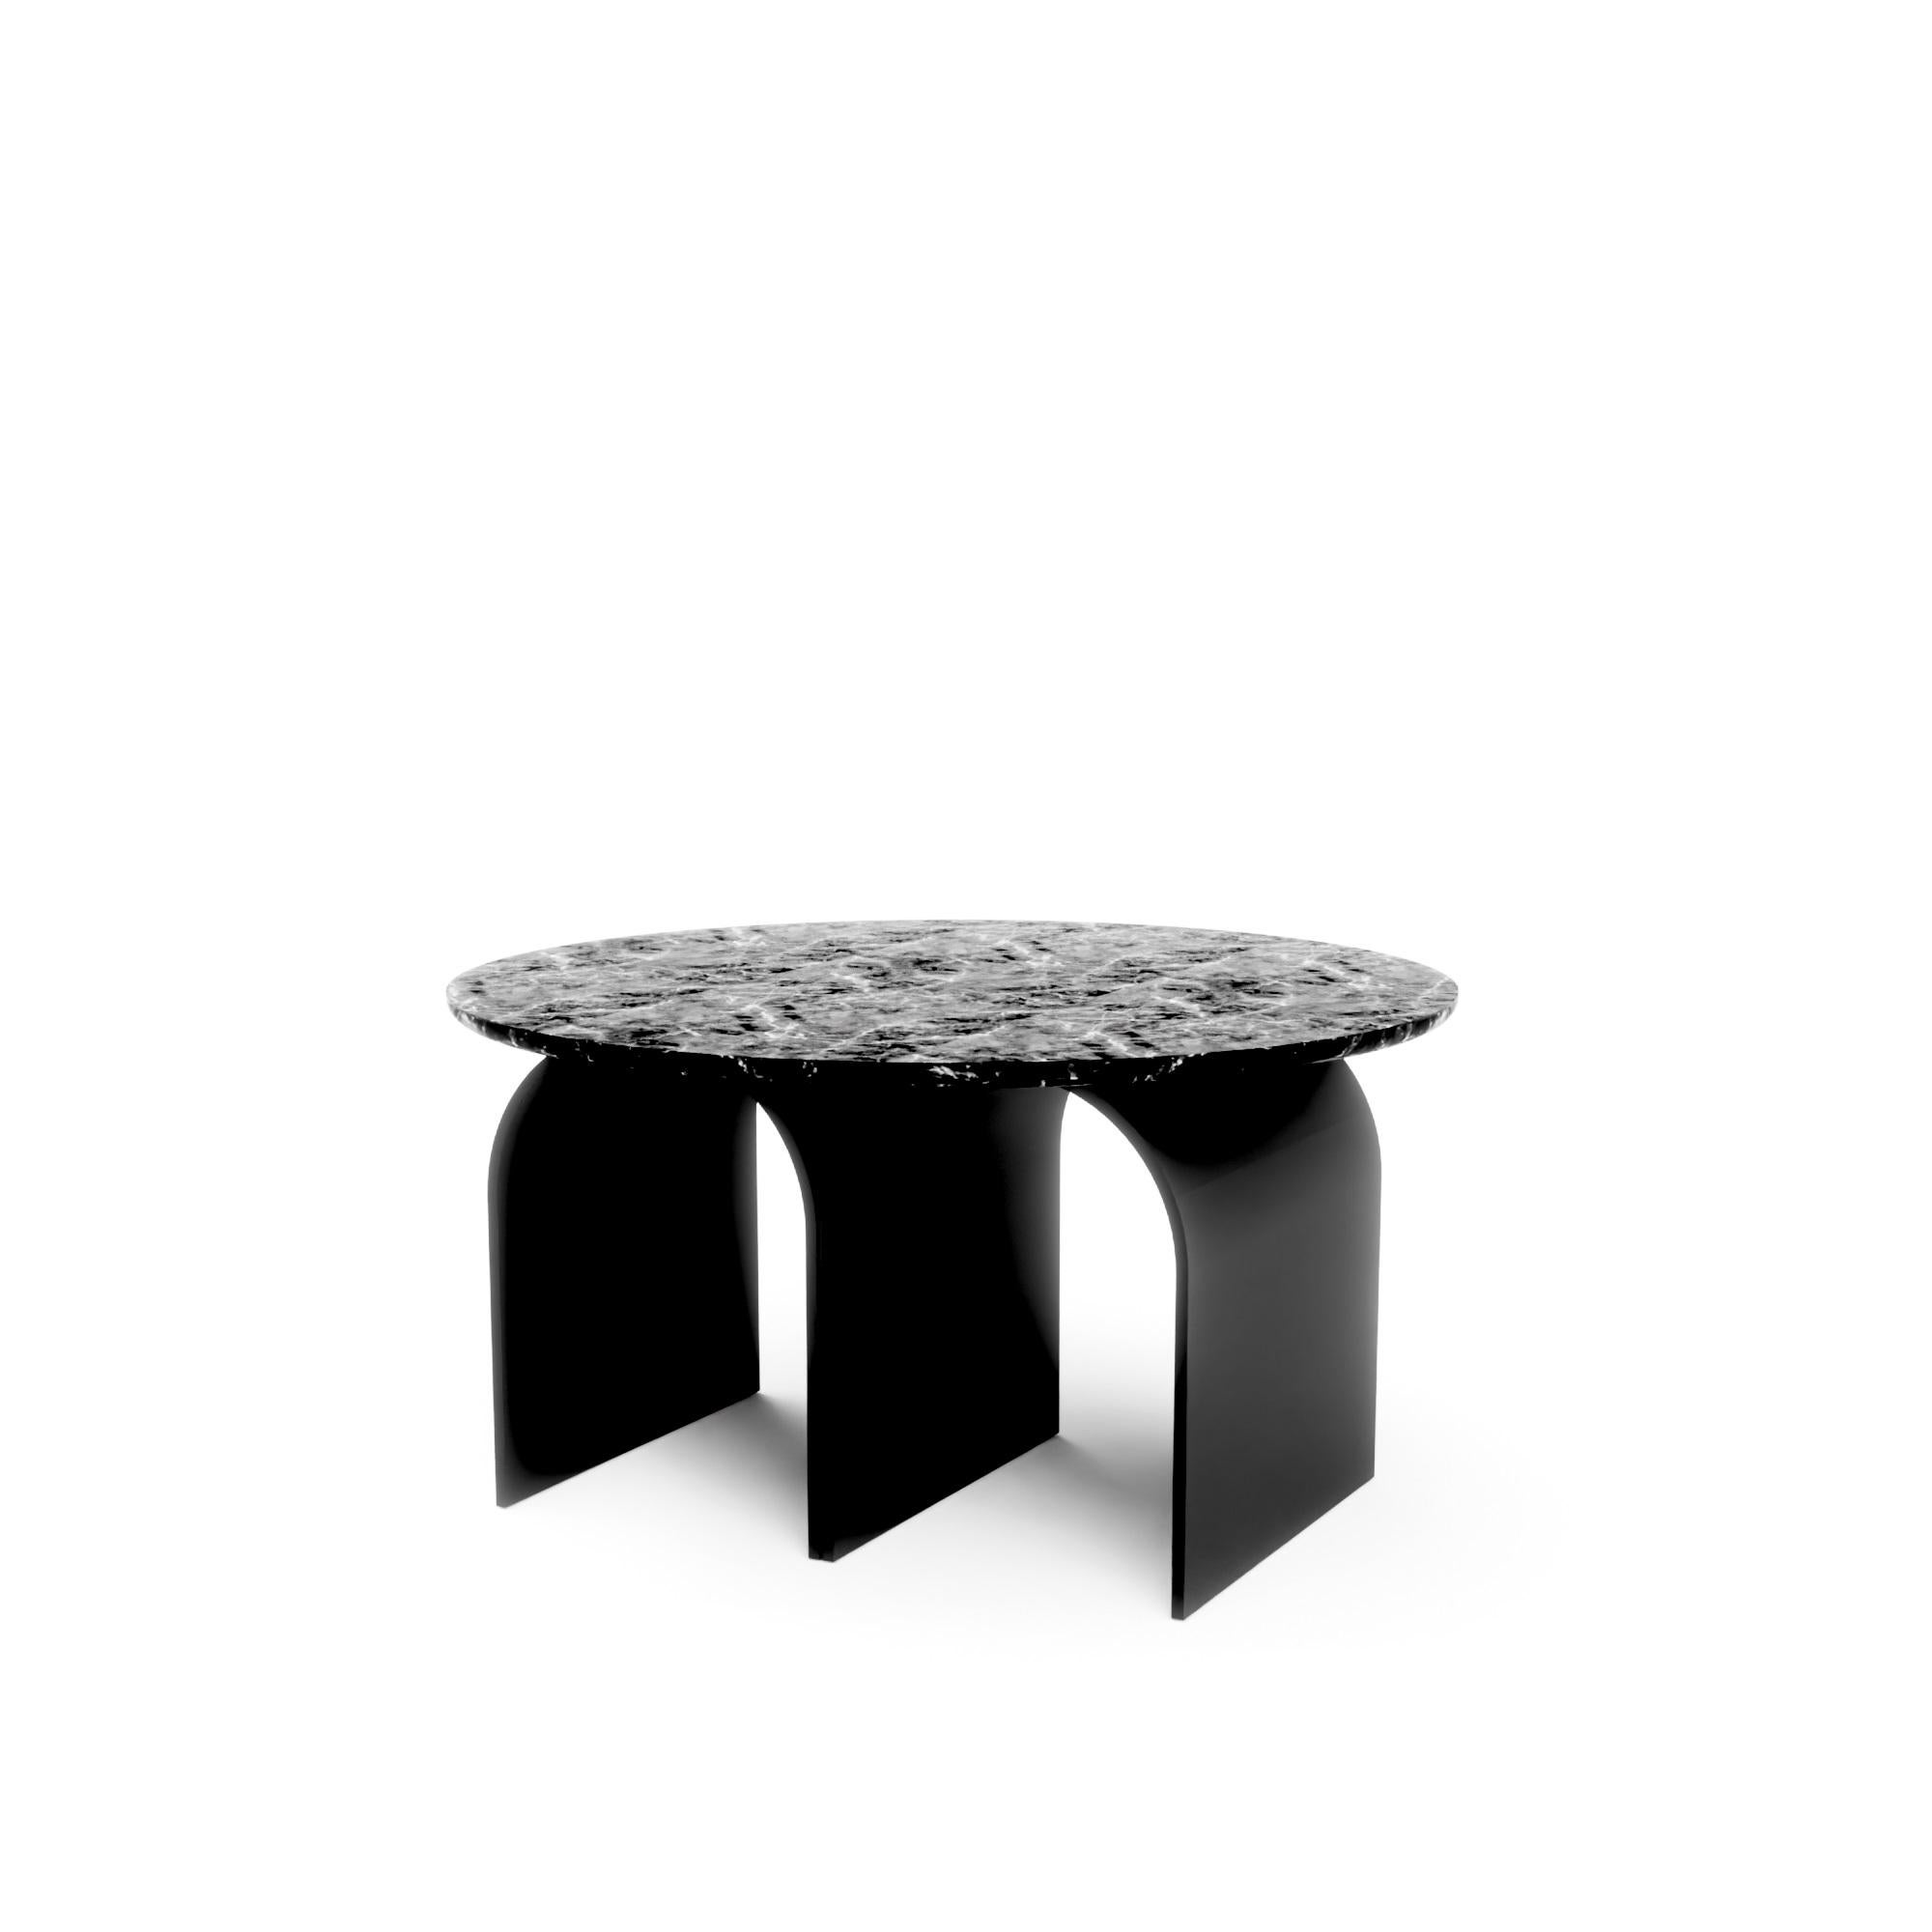 Swiss Rounded Marble Arcade Side and Cofffe Table by Kasadamo